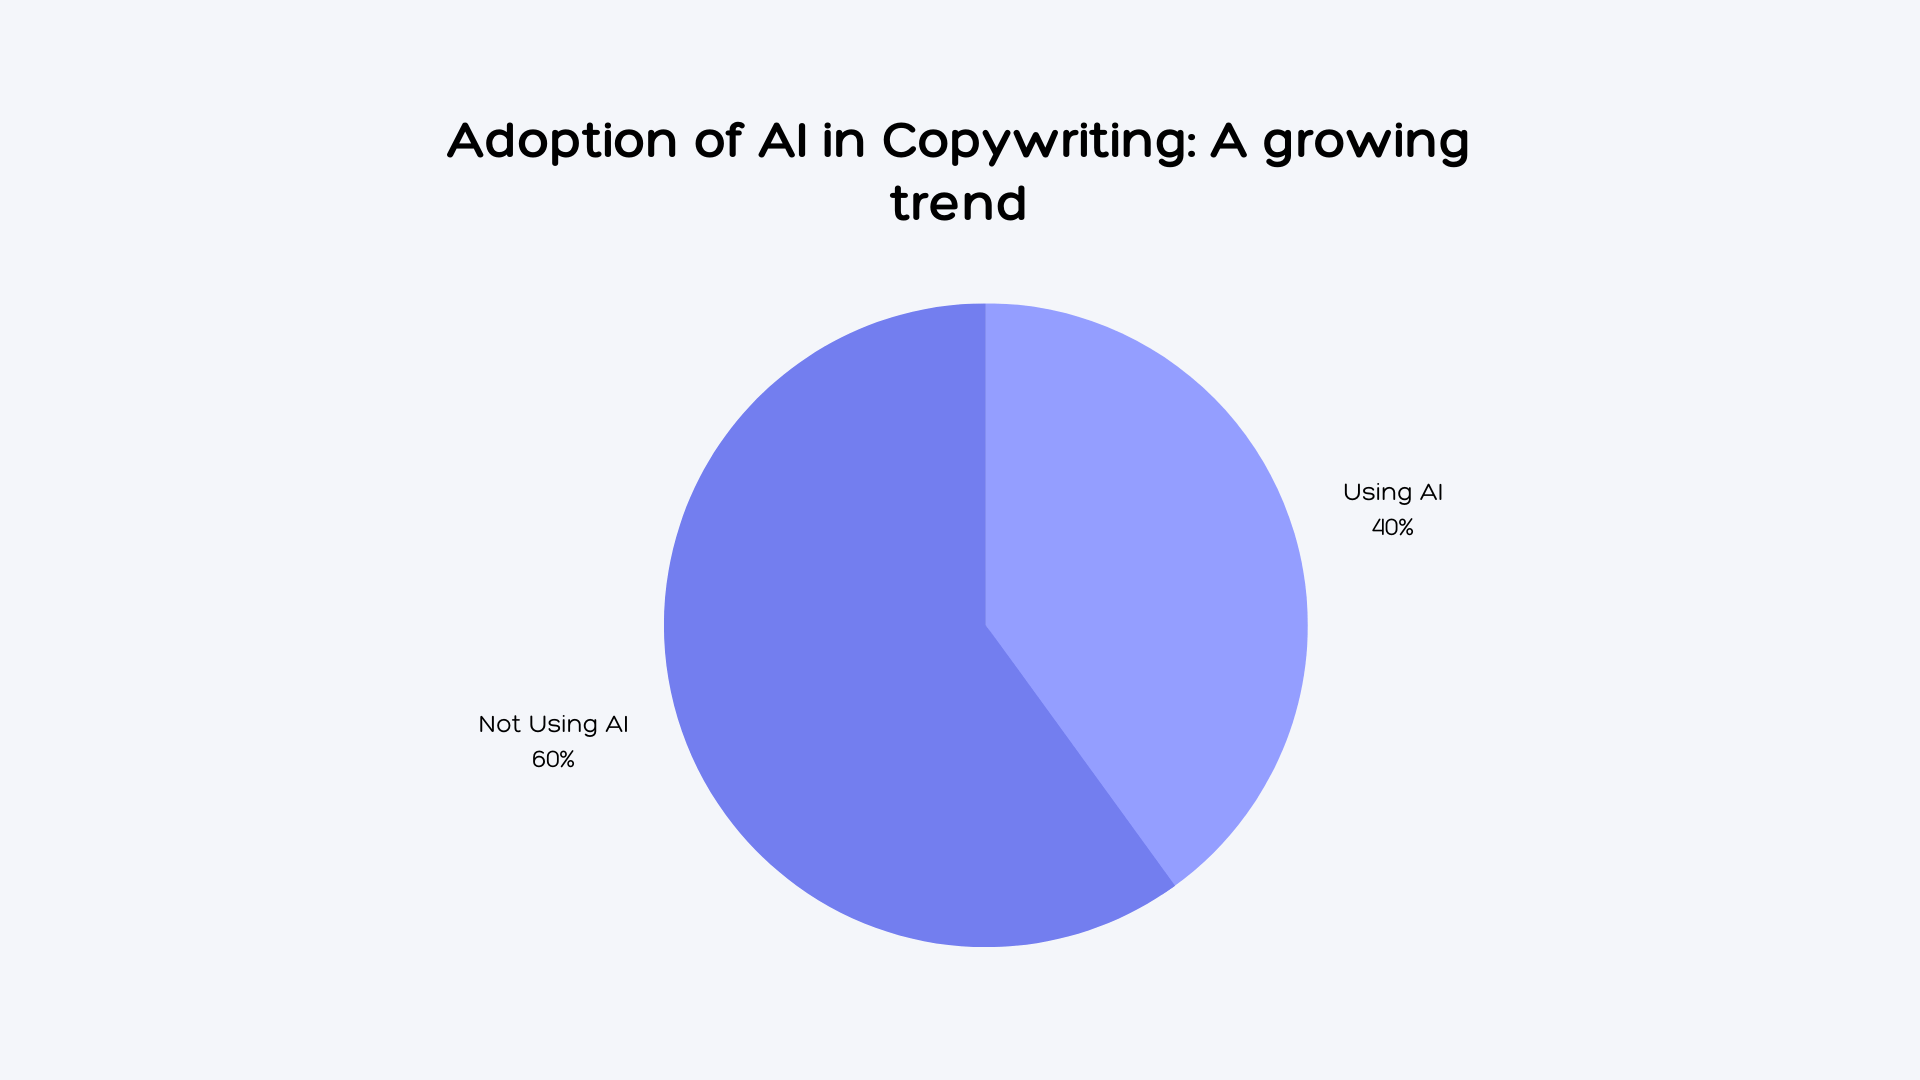 The adoption of AI copywriting in businesses